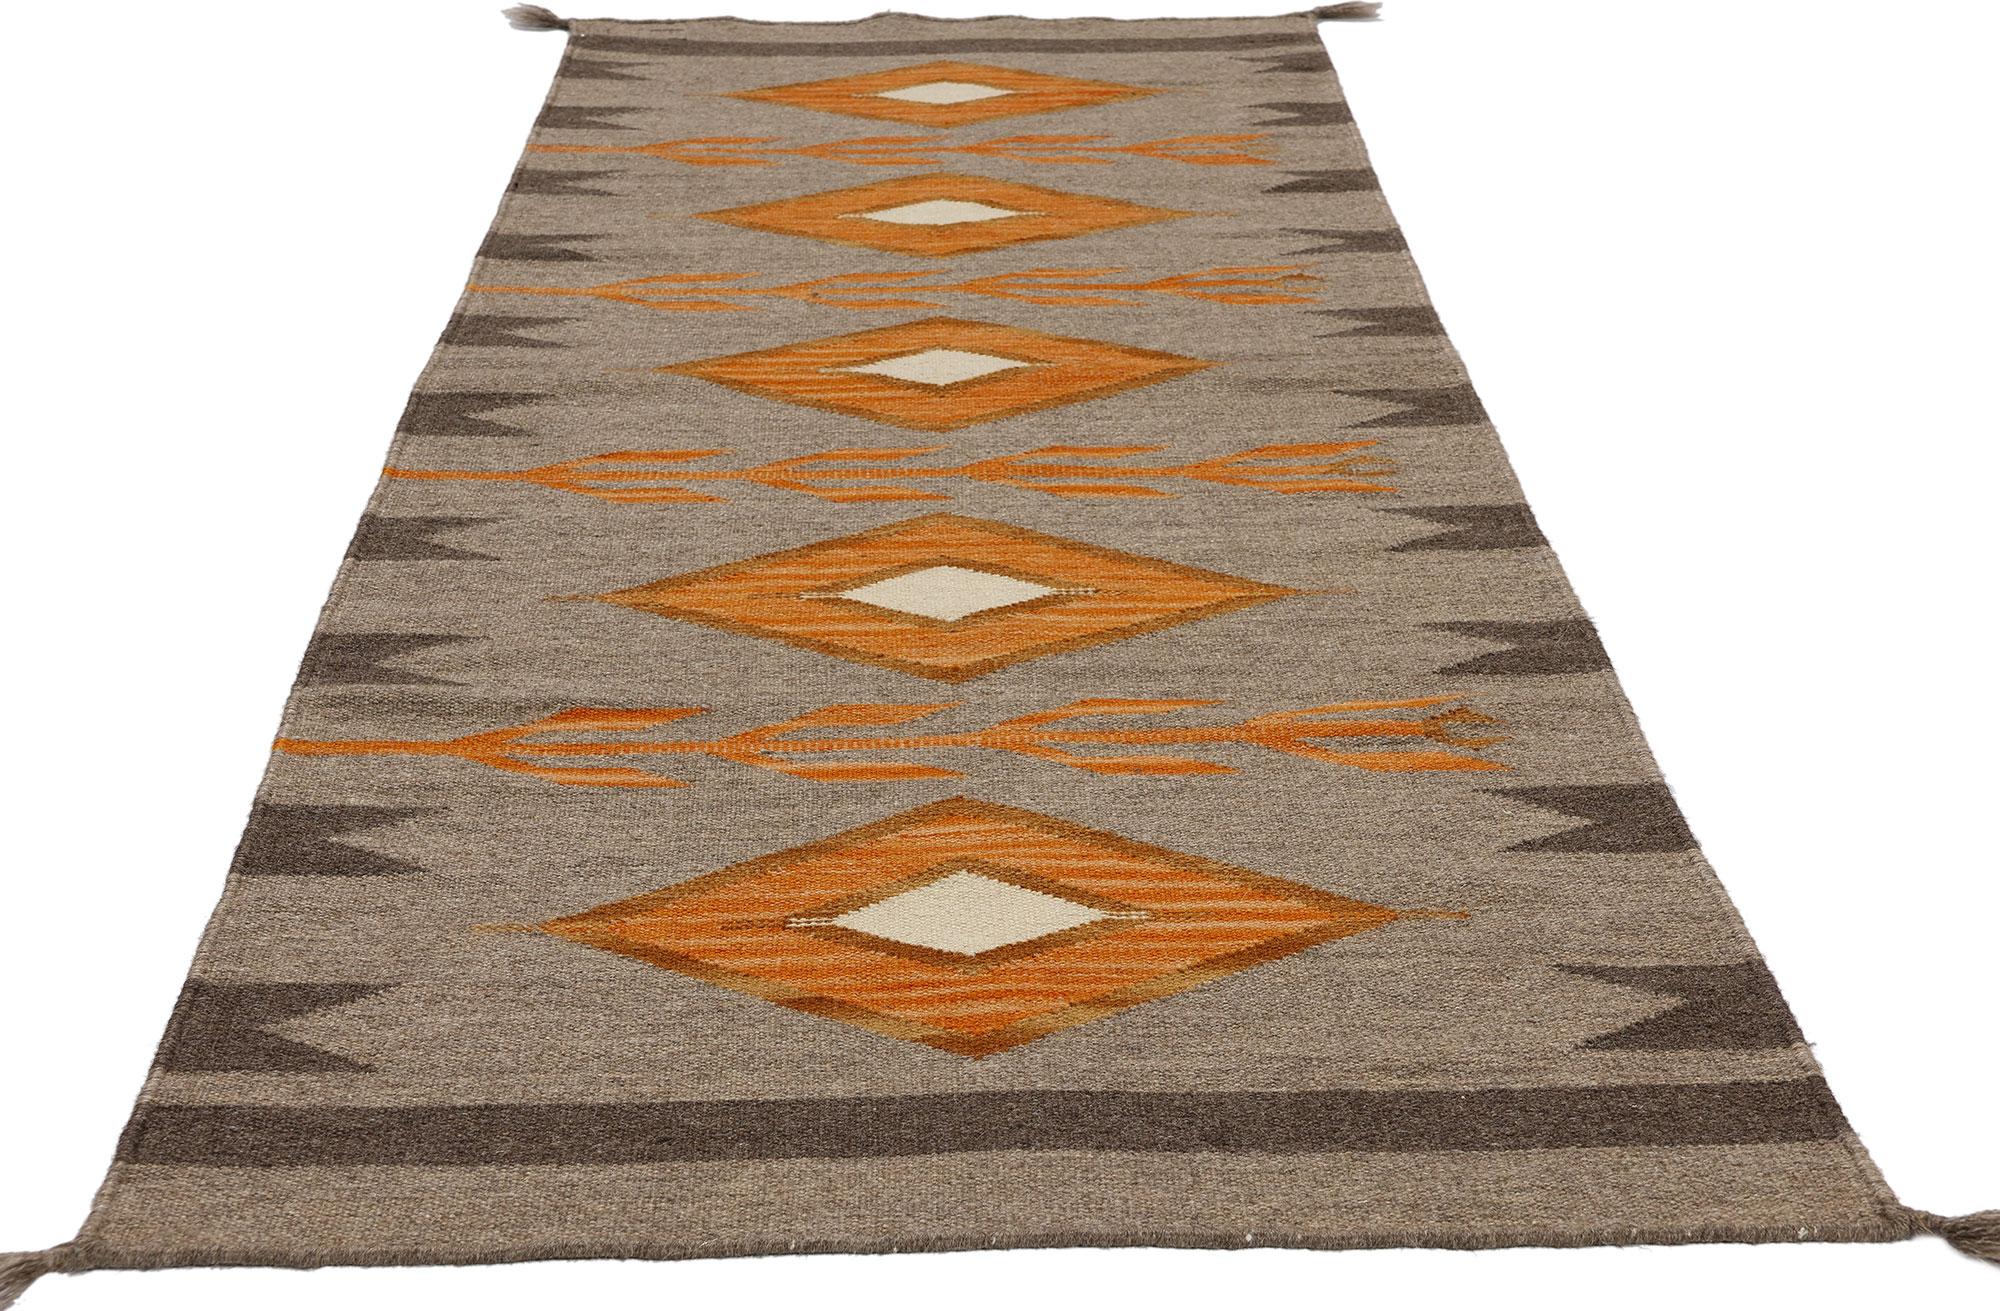 South Asian Contemporary Santa Fe Southwest Modern Navajo-Style Rug For Sale